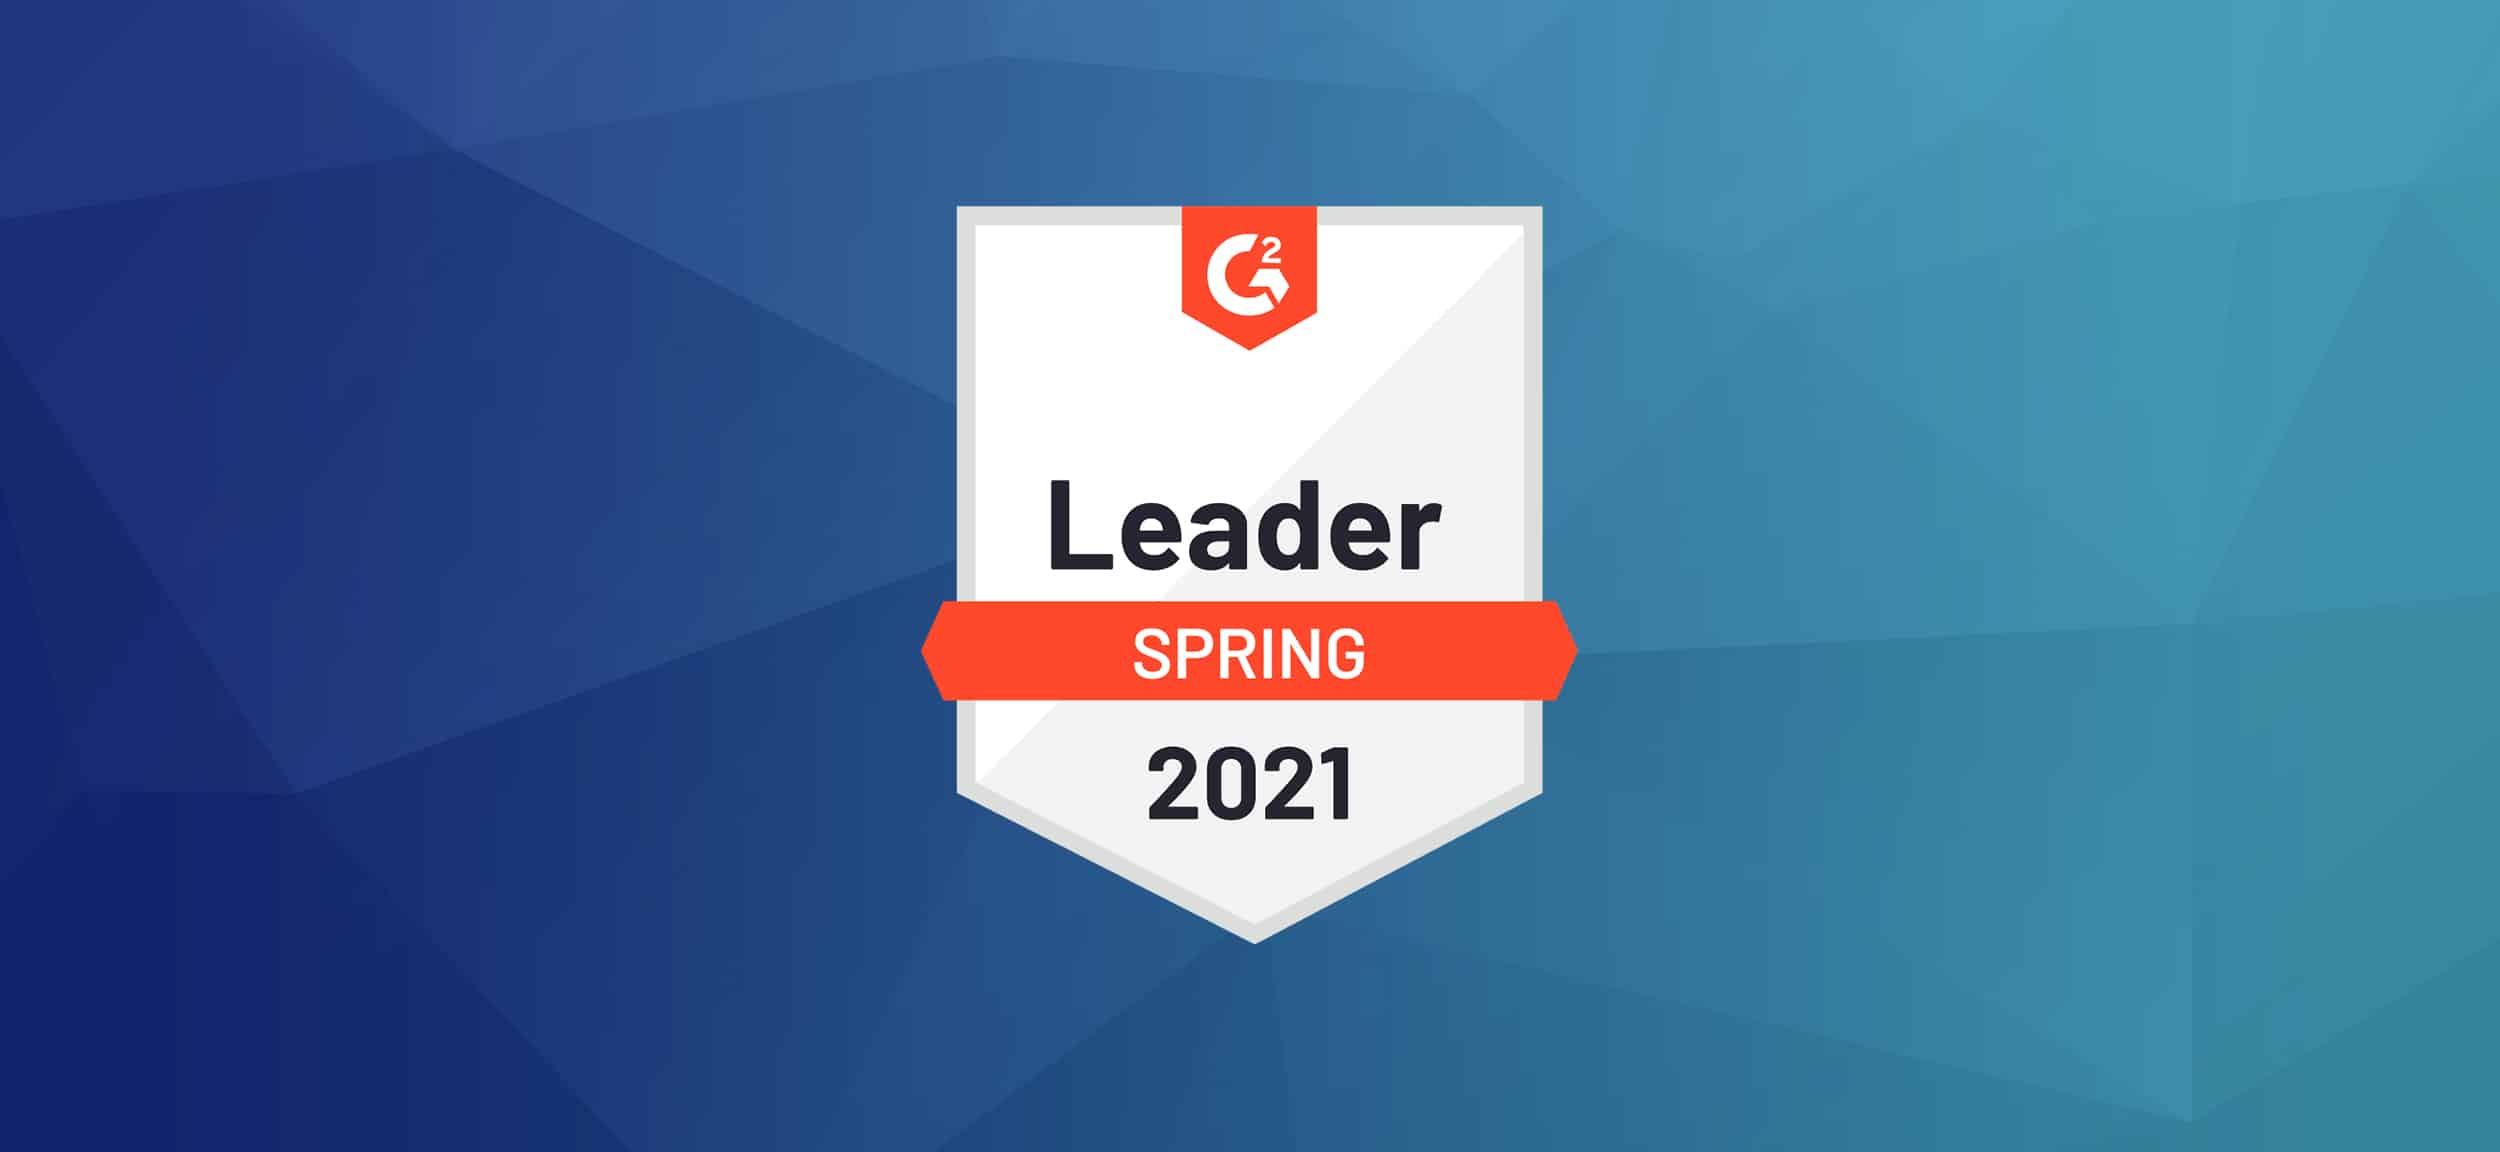 Follow the Leader TUNE Recognized in G2's Spring 2021 Grid Reports